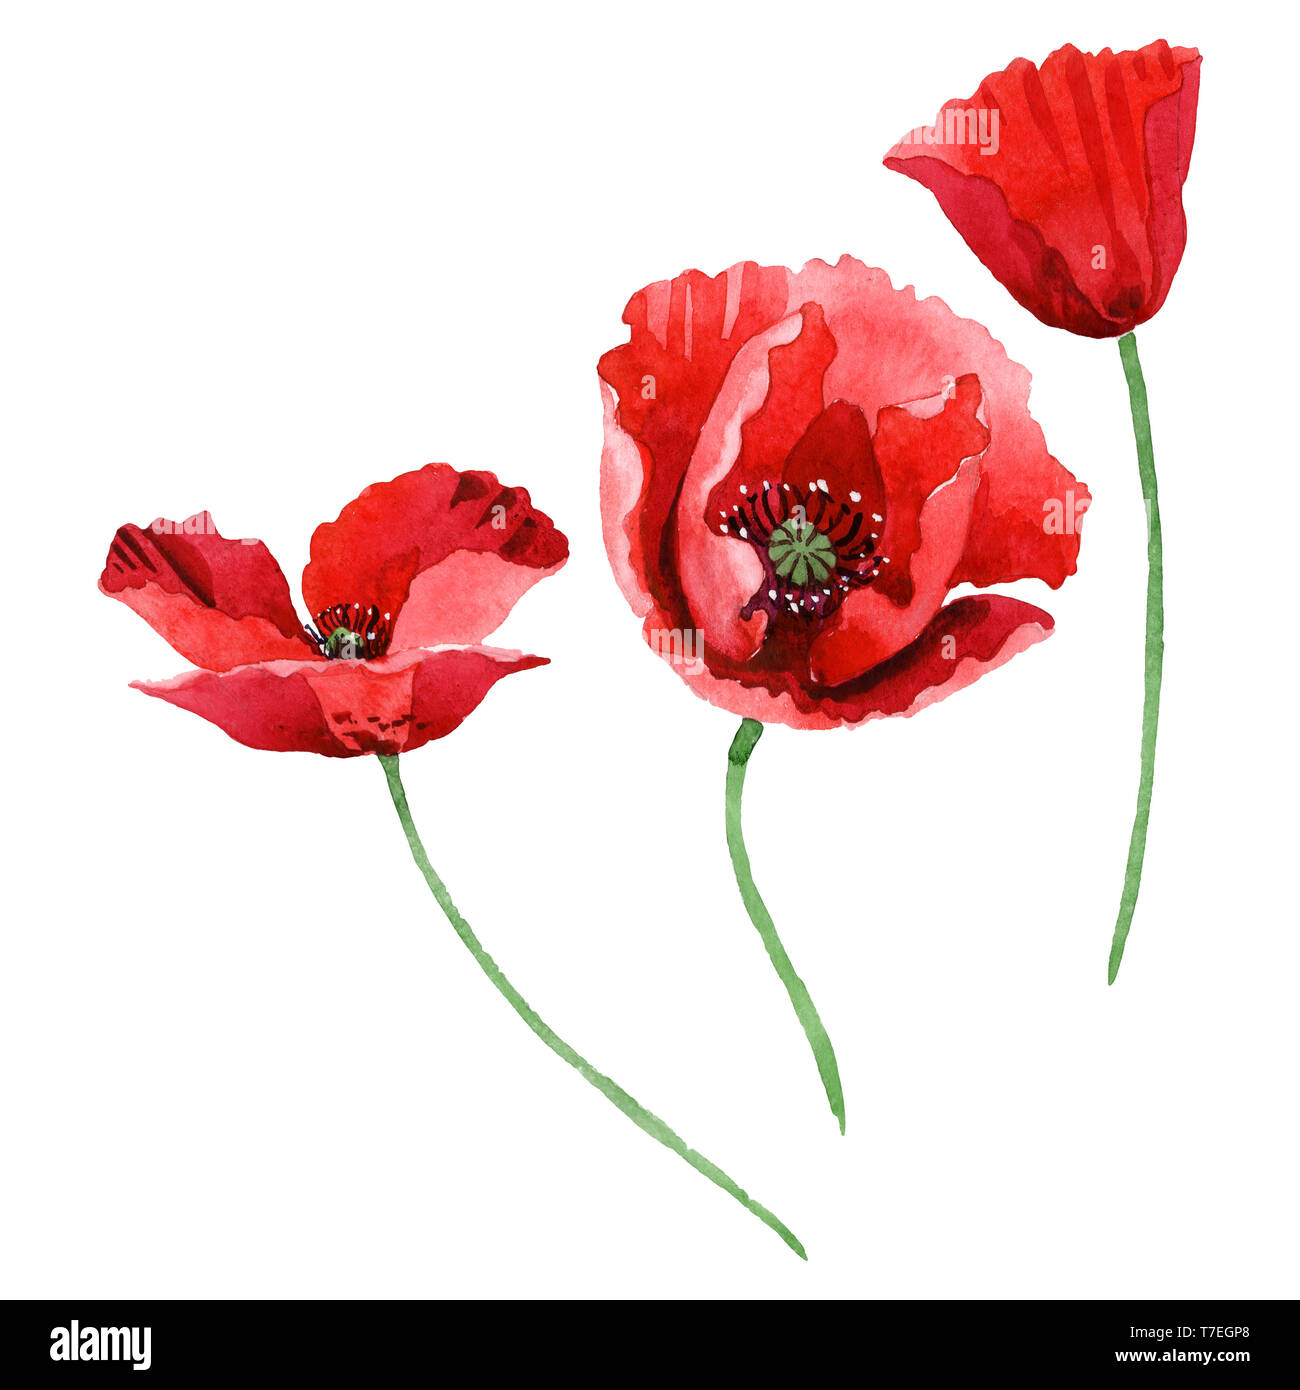 Red Poppy Floral Botanical Flowers Wild Spring Leaf Wildflower Isolated Watercolor Background Illustration Set Watercolour Drawing Fashion Aquarell Stock Photo Alamy